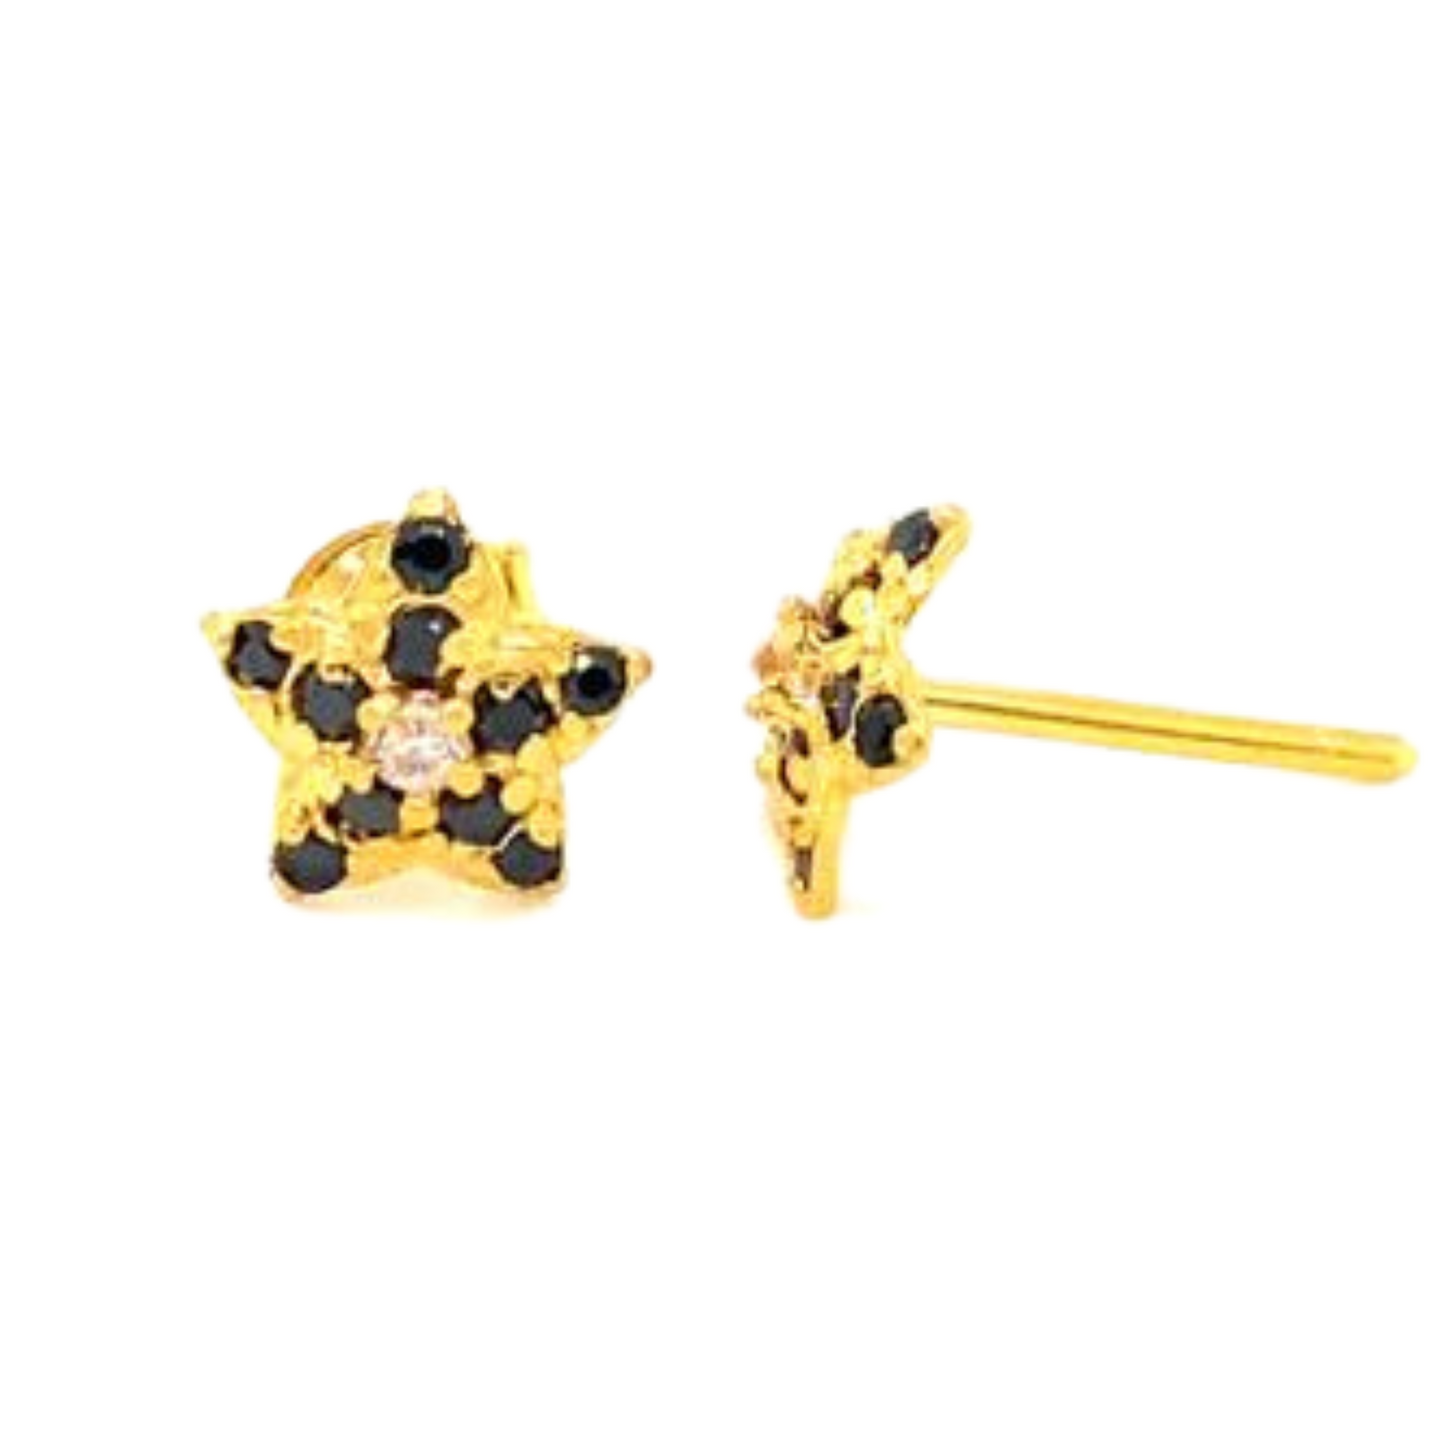 22KT Gold Earrings with White & Black CZ